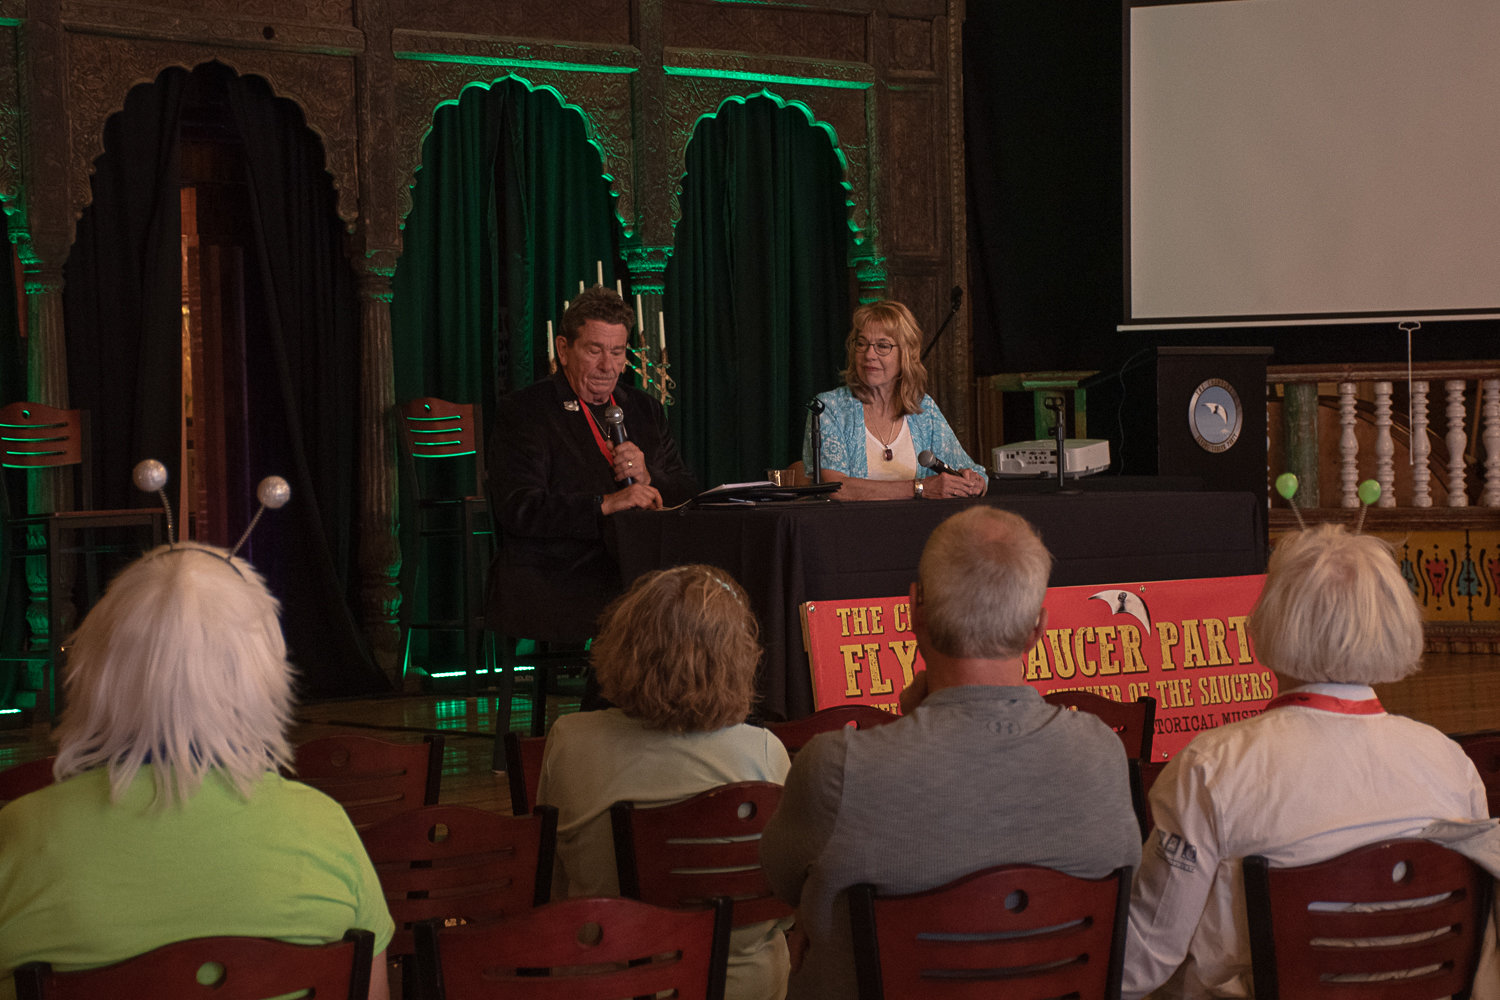 James and Joanne Clarkson talk Chehalis Flying Saucer Party attendees through some of the eyewitness accounts of UFO encounters they have collected throughout their years of research. James is a retired detective while Joanne is a psychic medium. Photo by Owen Sexton.